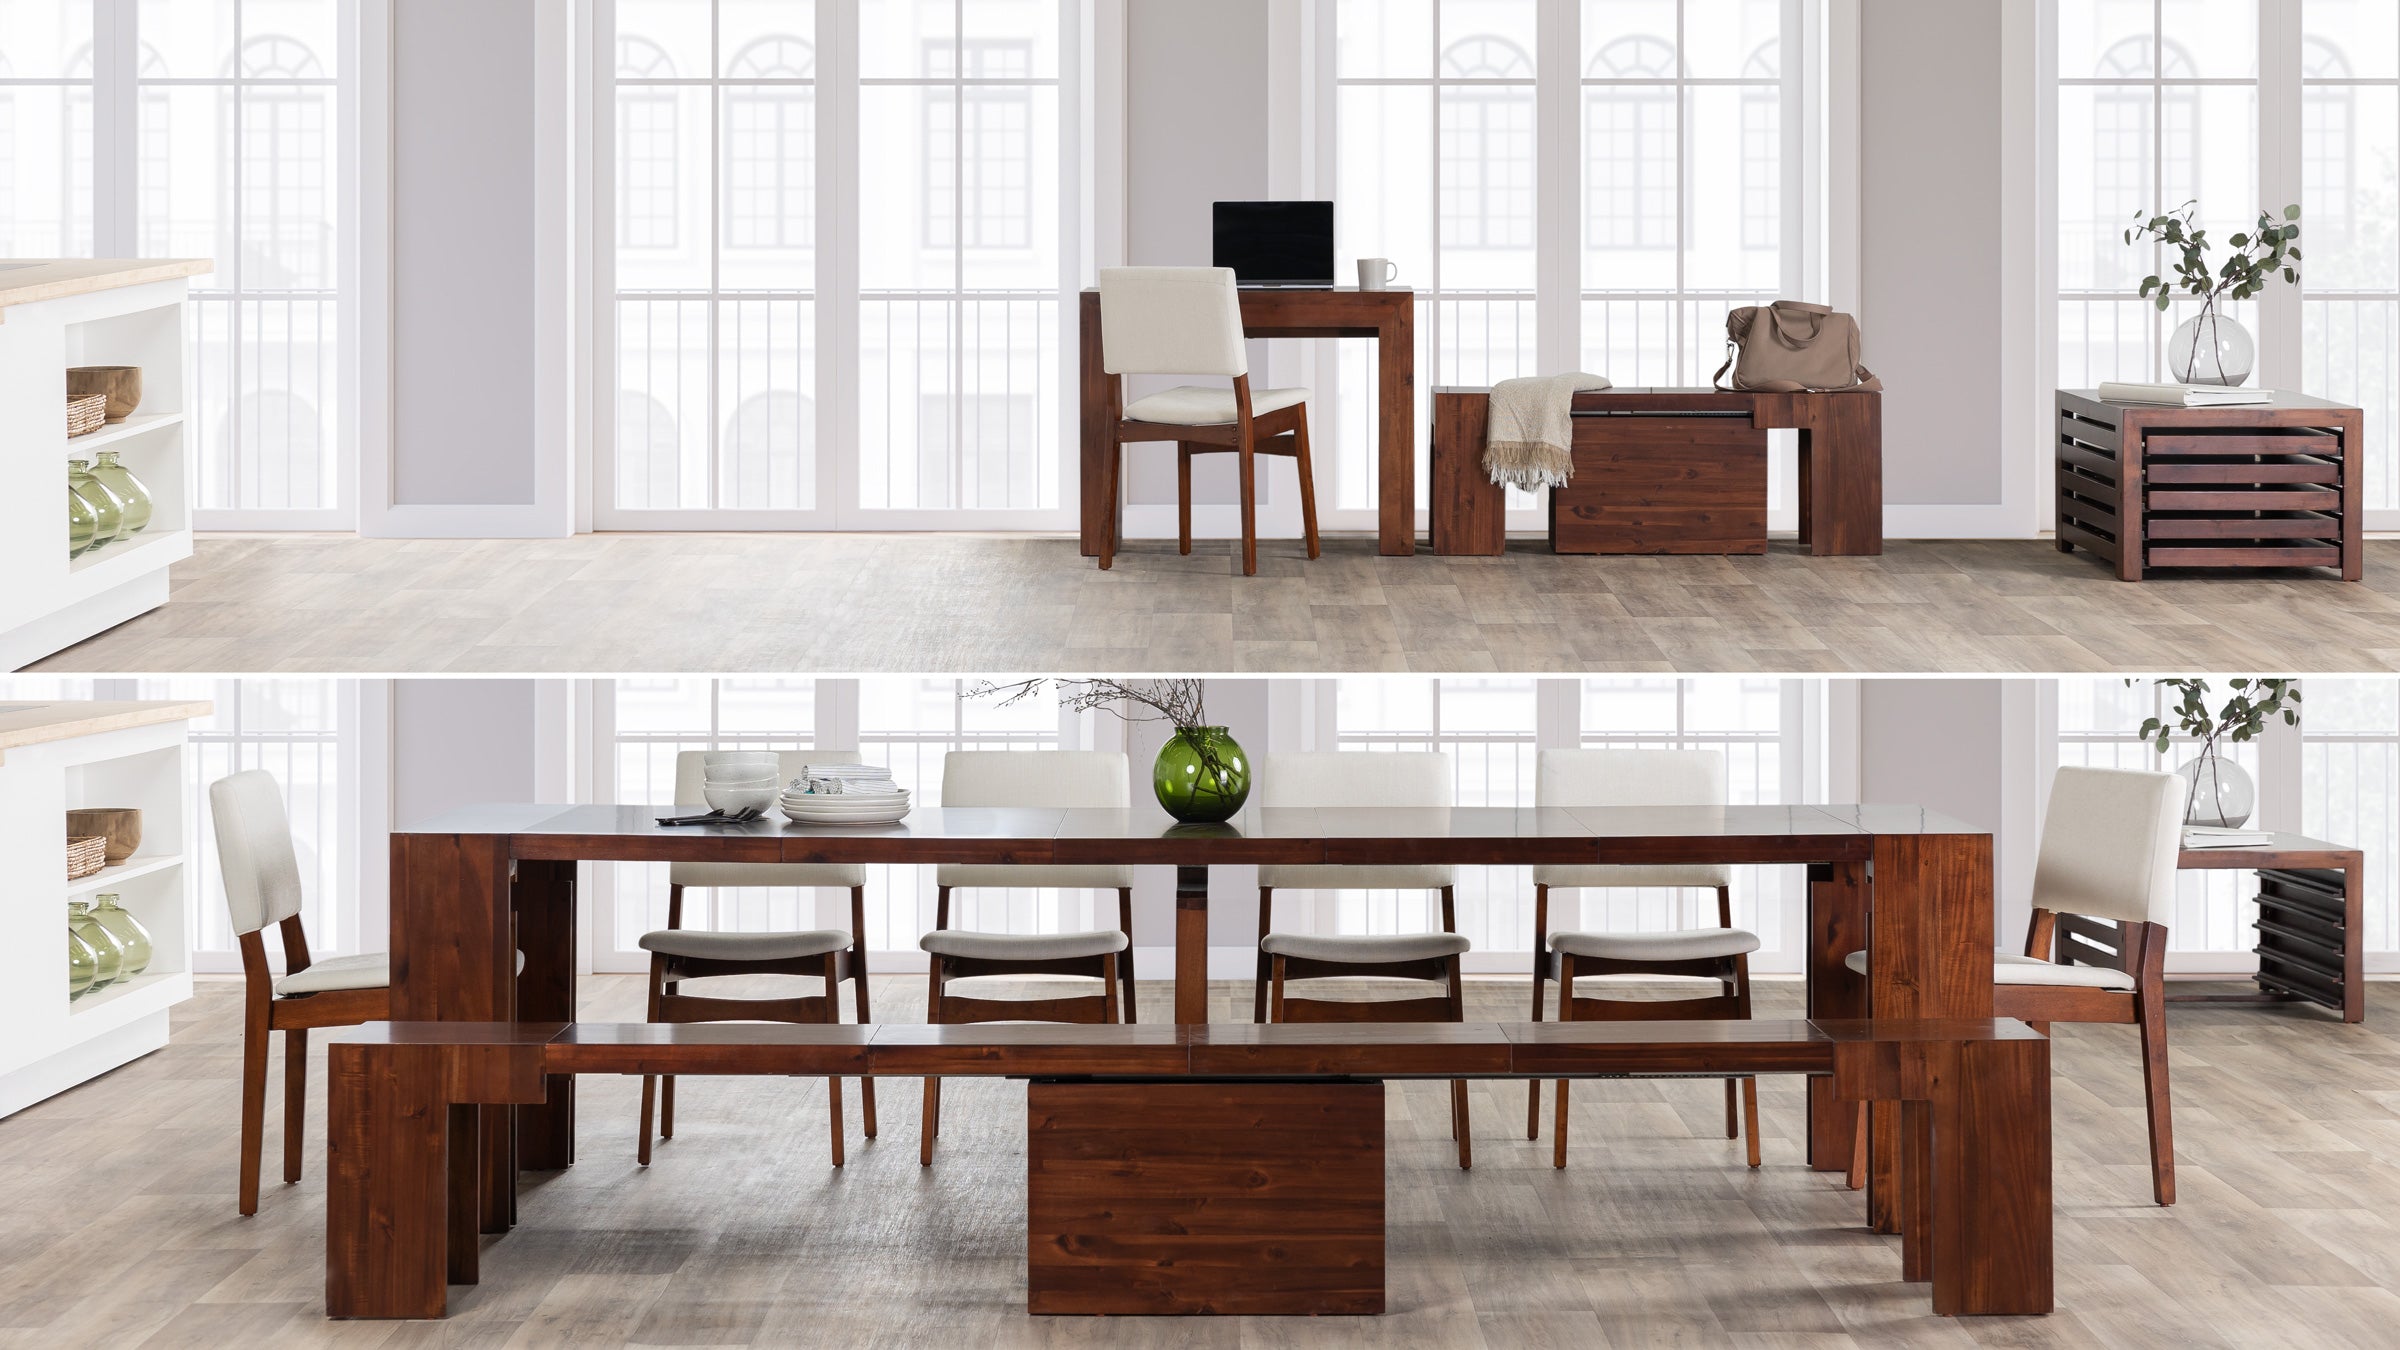 Two photos stacked on top of one another picturing the Transformer Dining Set 3.0 in the American Mahogany Finish (1 Transformer Table + 1 Transformer Bench + 4-6 chairs).